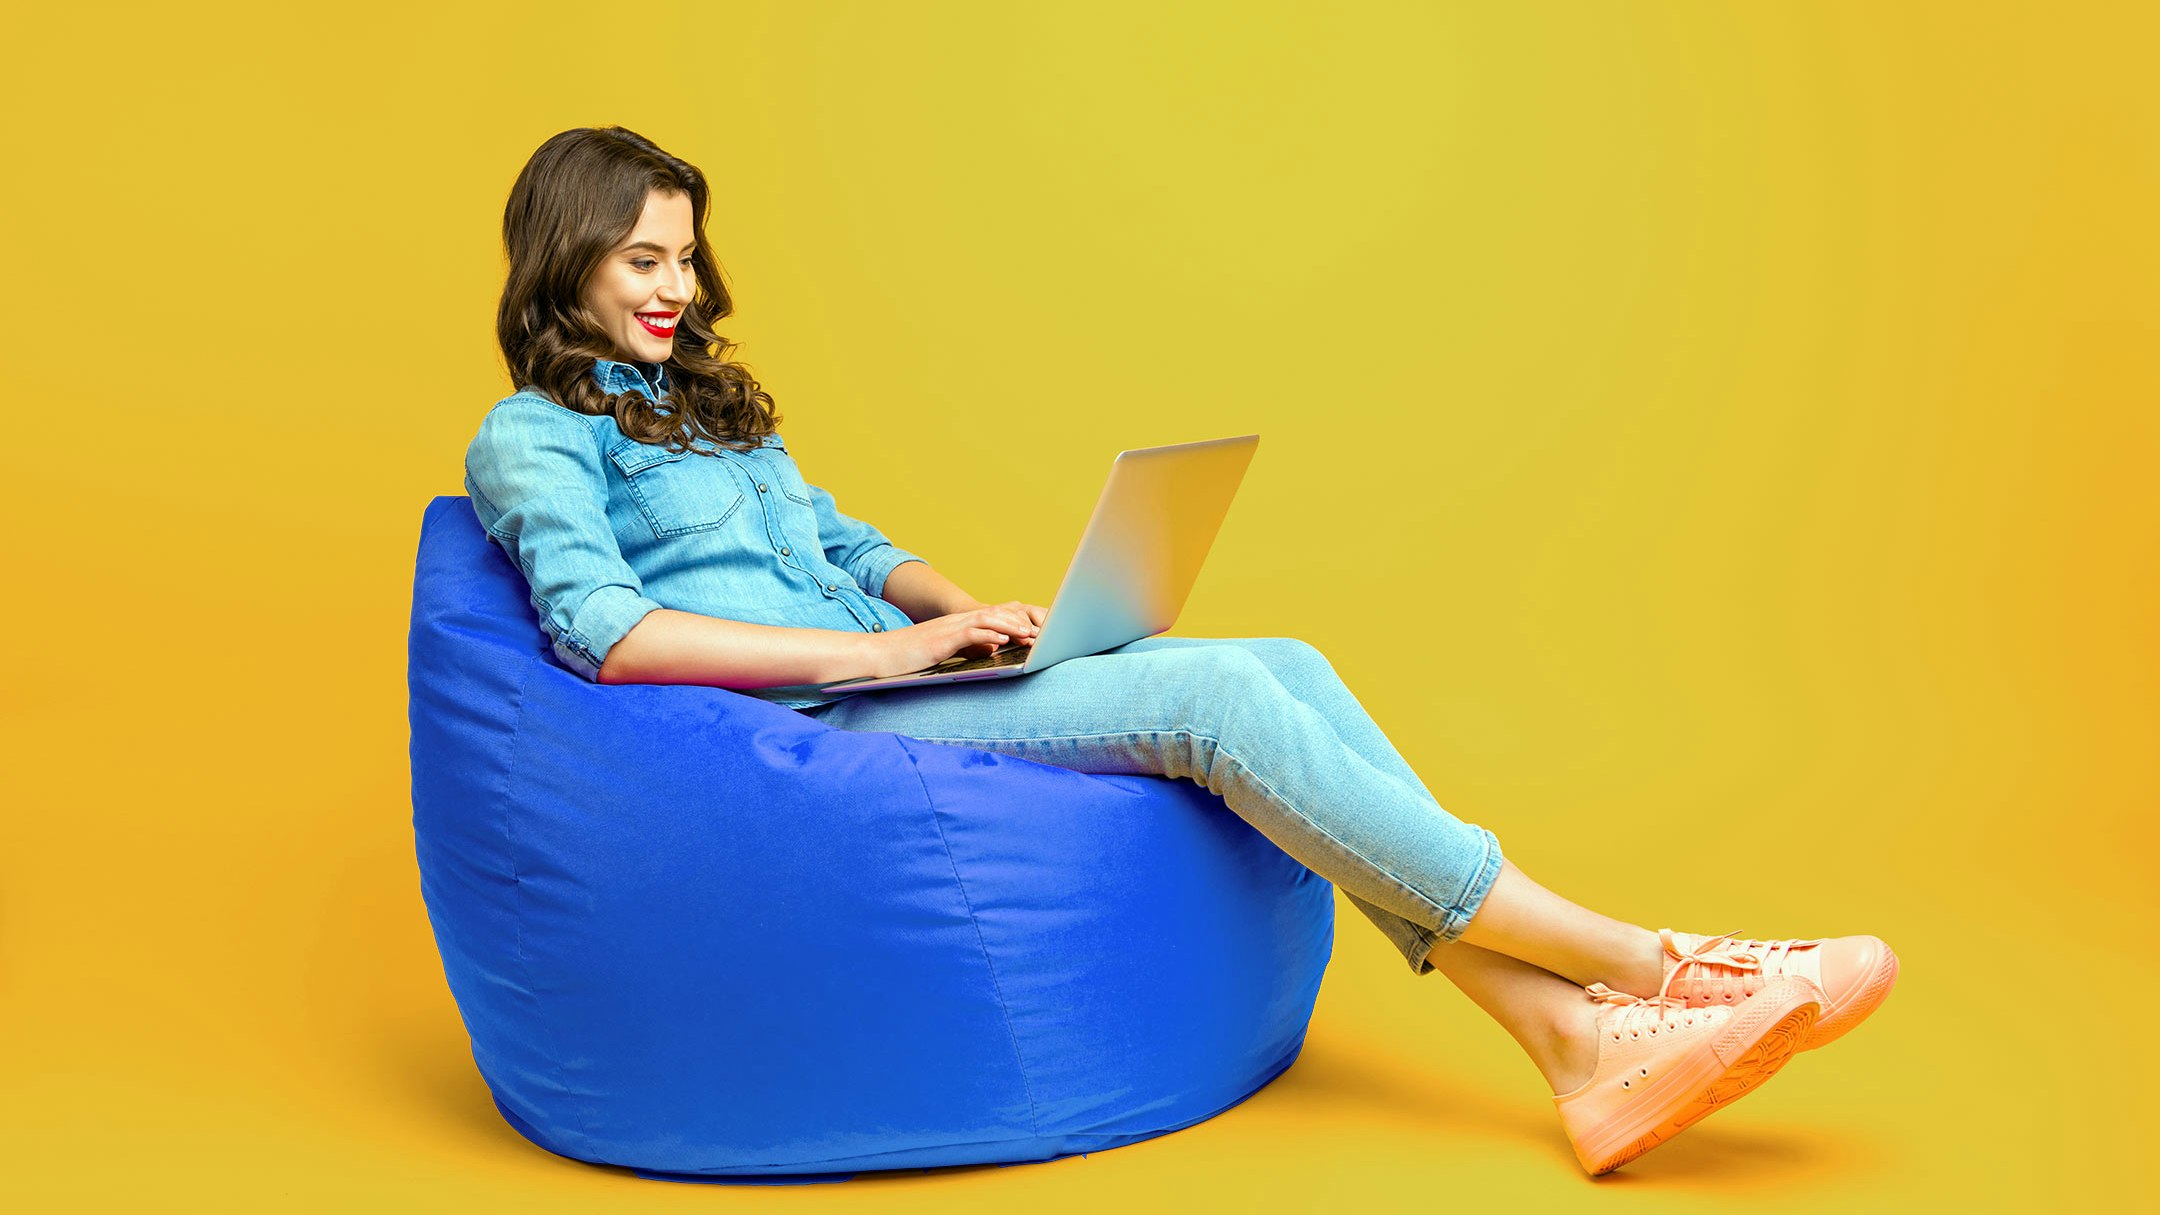 Woman sitting on a beanbag with a laptop